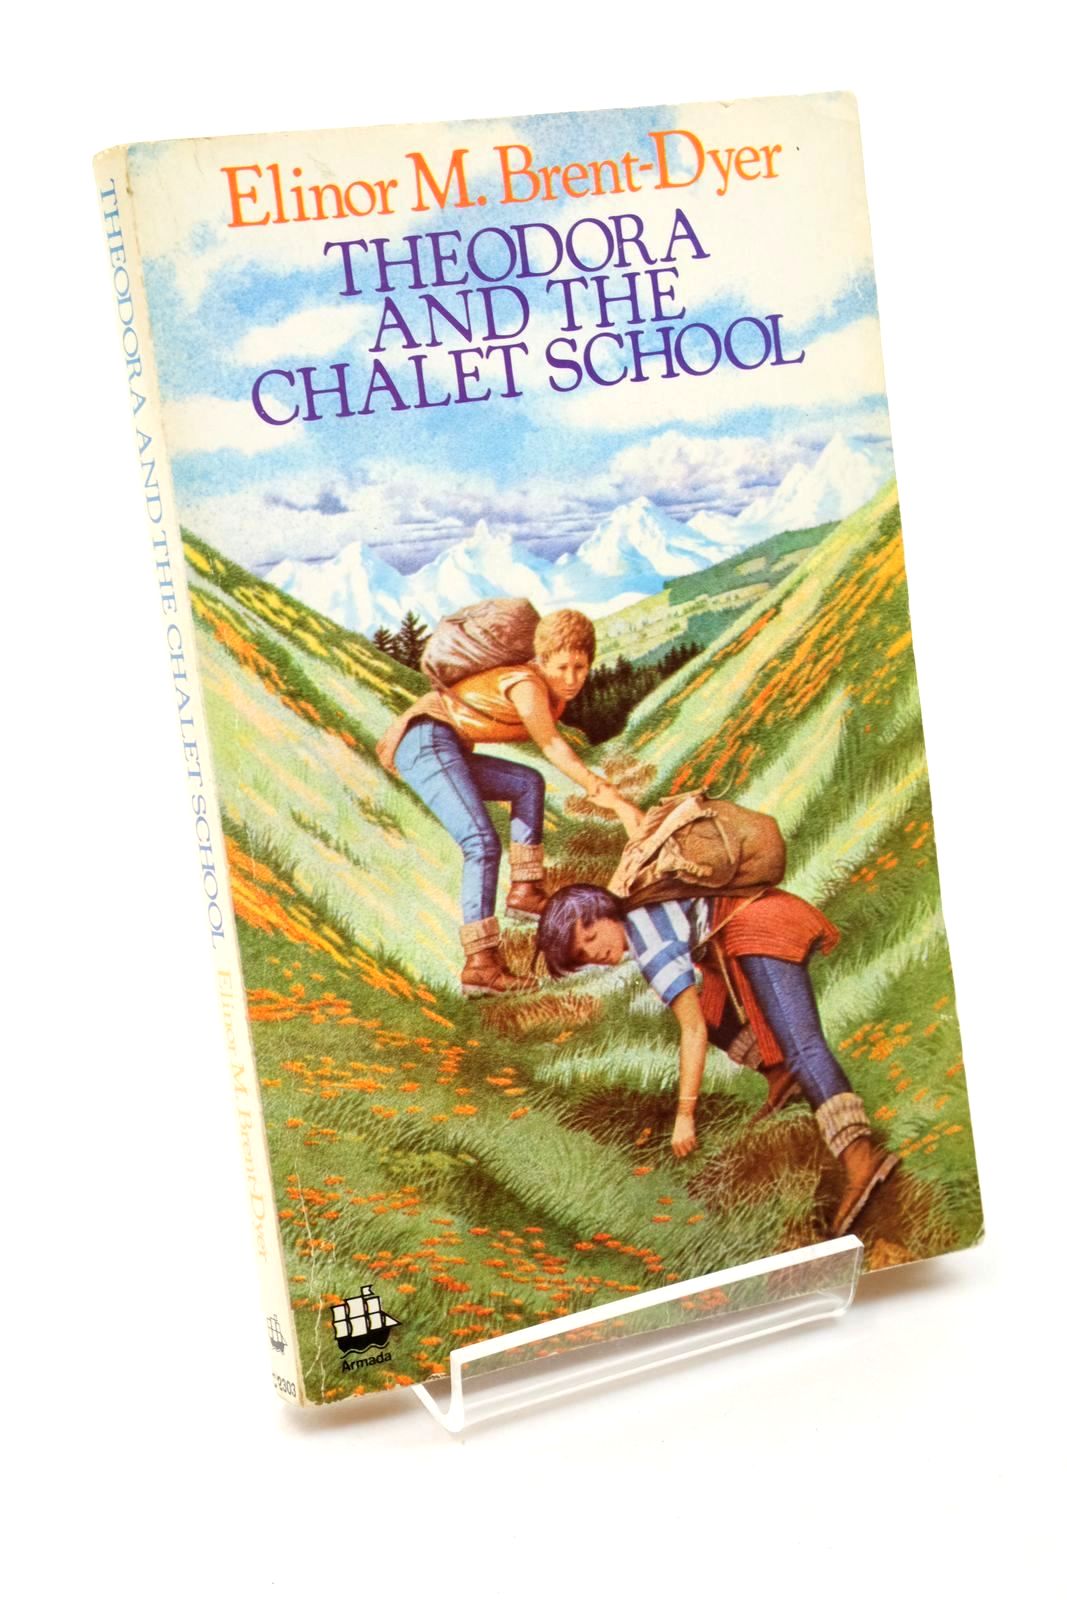 Photo of THEODORA AND THE CHALET SCHOOL- Stock Number: 1322576